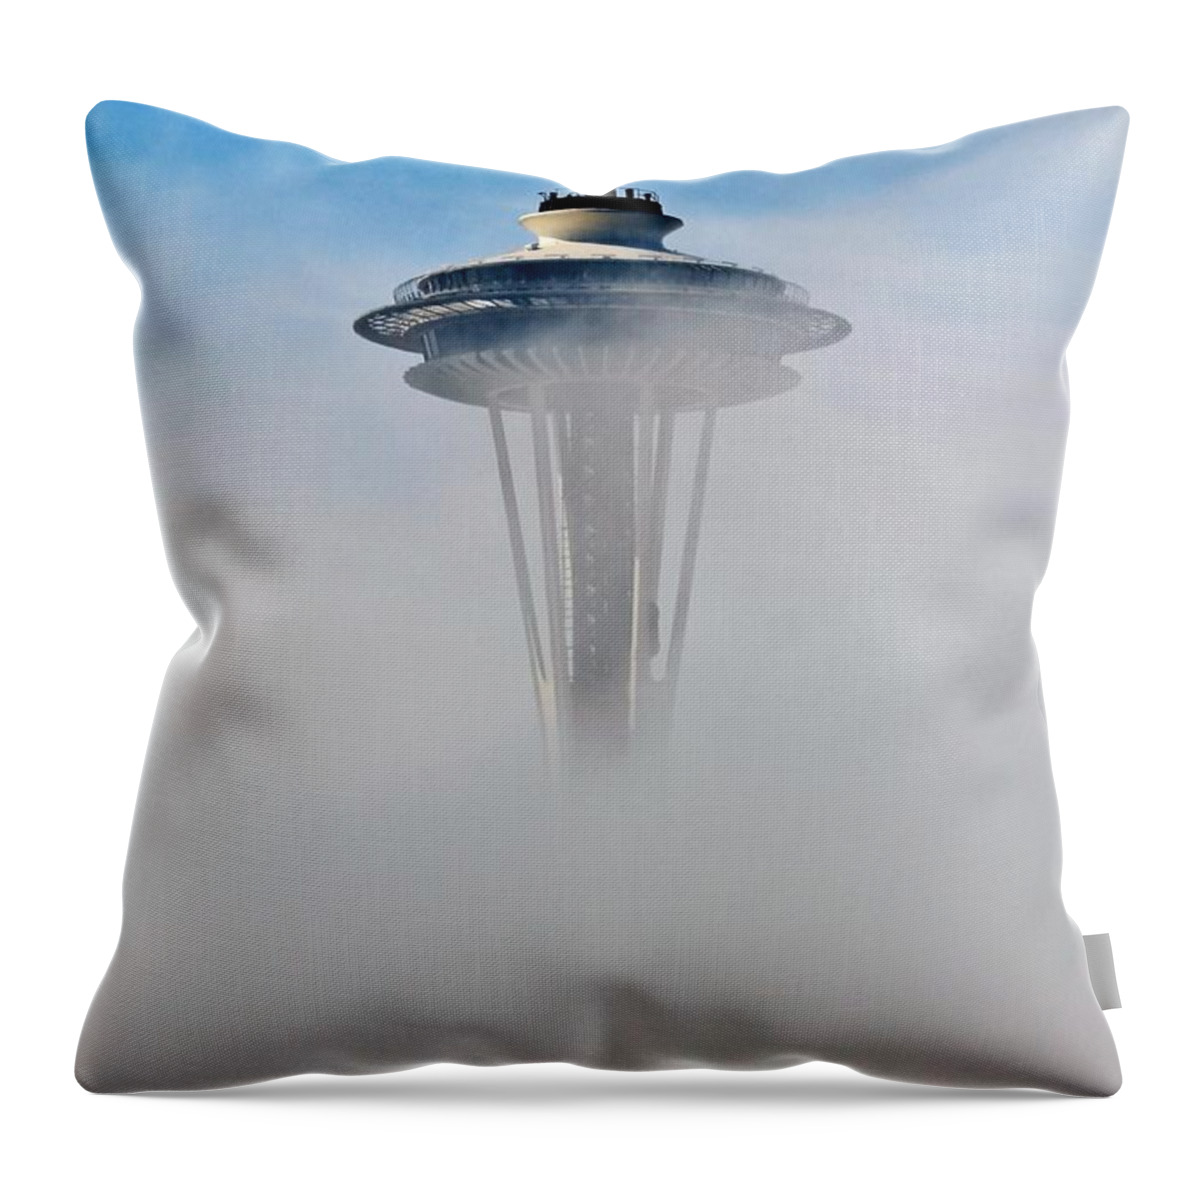 Space Throw Pillow featuring the photograph Cloud City Needle by Benjamin Yeager